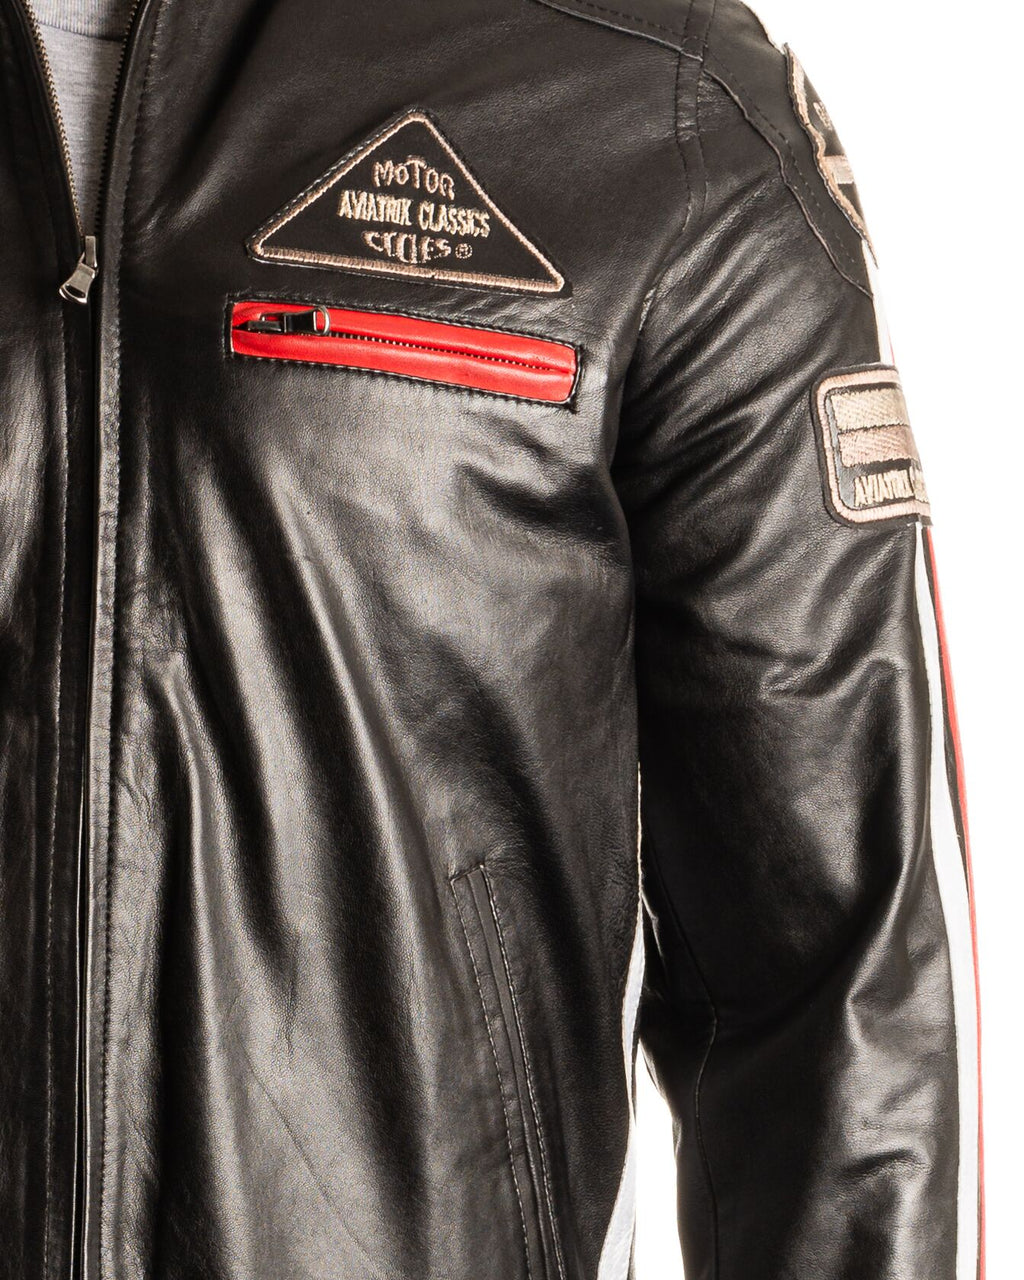 Men's Vintage Style Racing Biker Style Leather Jacket: Paolo